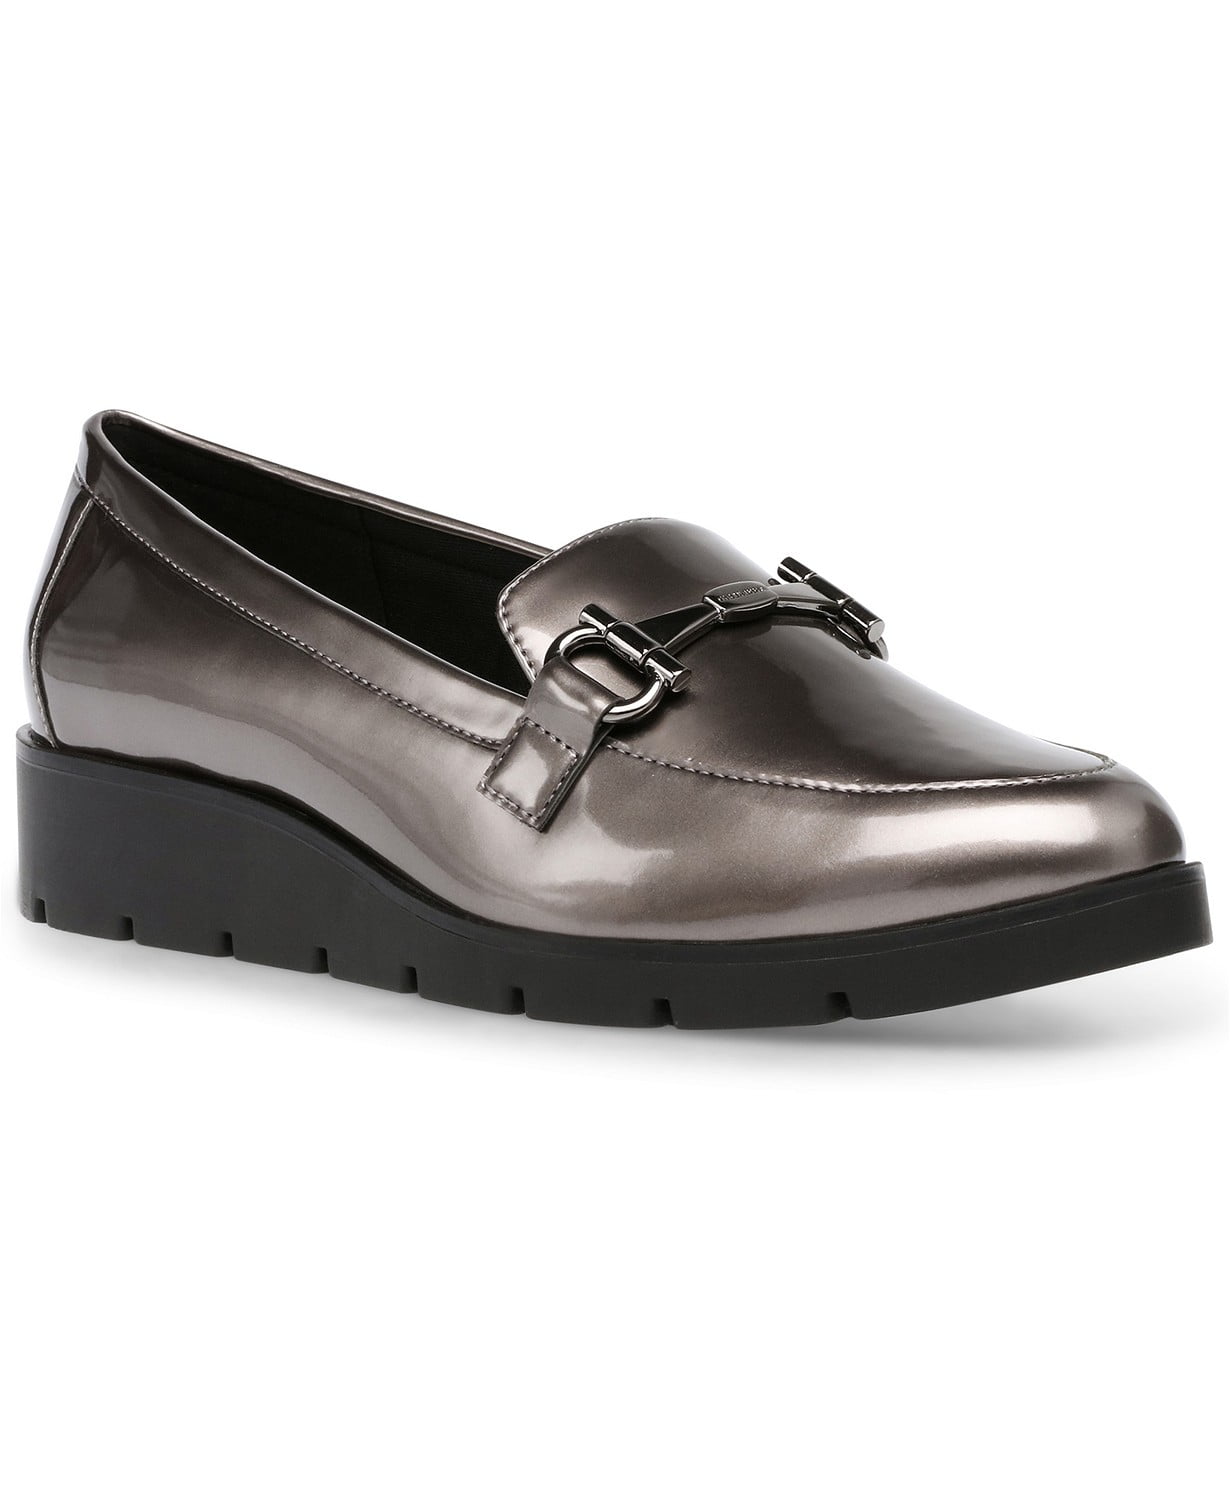 woocommerce-673321-2209615.cloudwaysapps.com-anne-klein-womens-grey-lalita-loafers-shoes